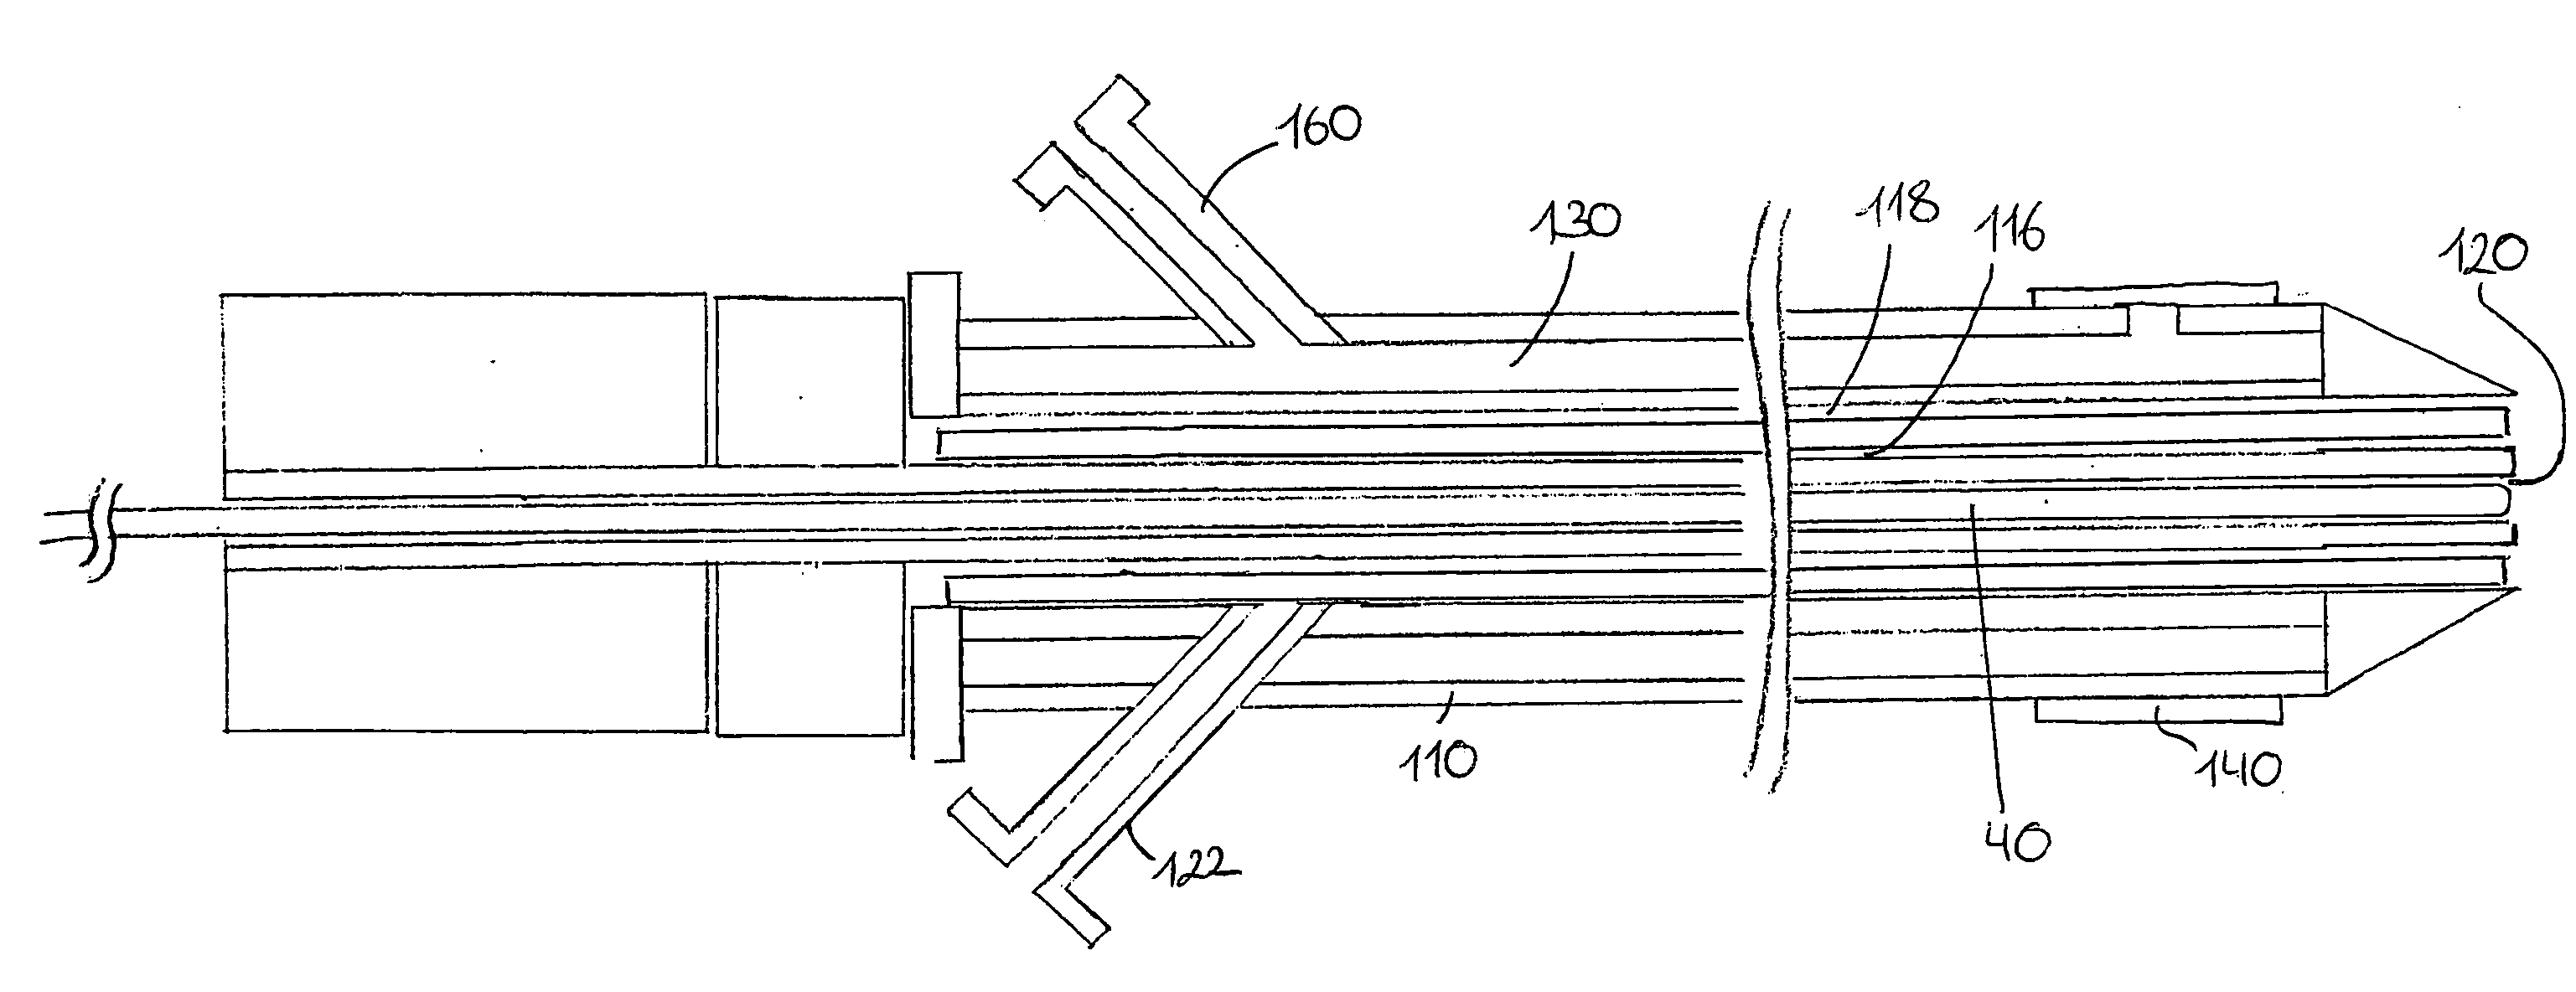 Catheter for treatment of total occlusions and methods for manufacture and use of the catheter